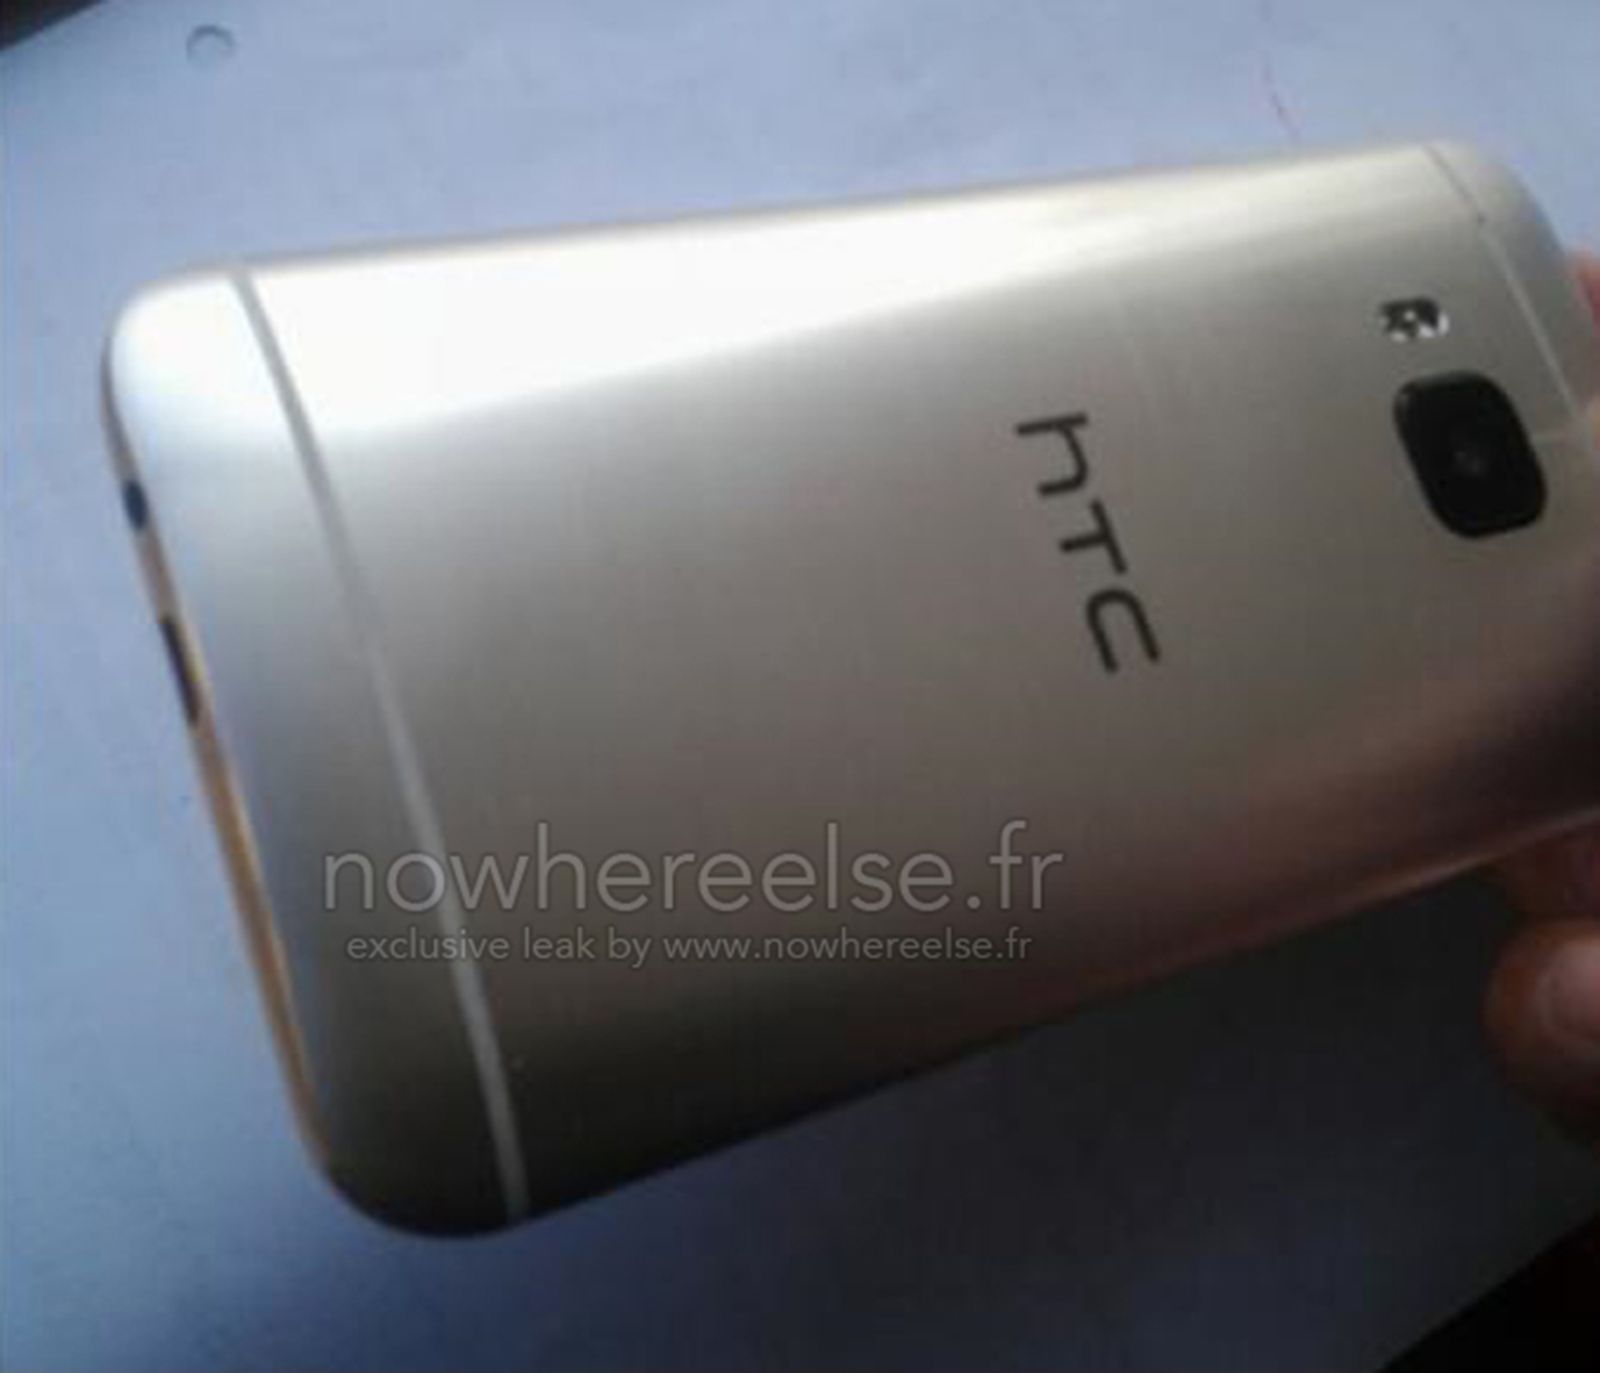 htc one m9 what to expect during mwc 2015 press event image 2